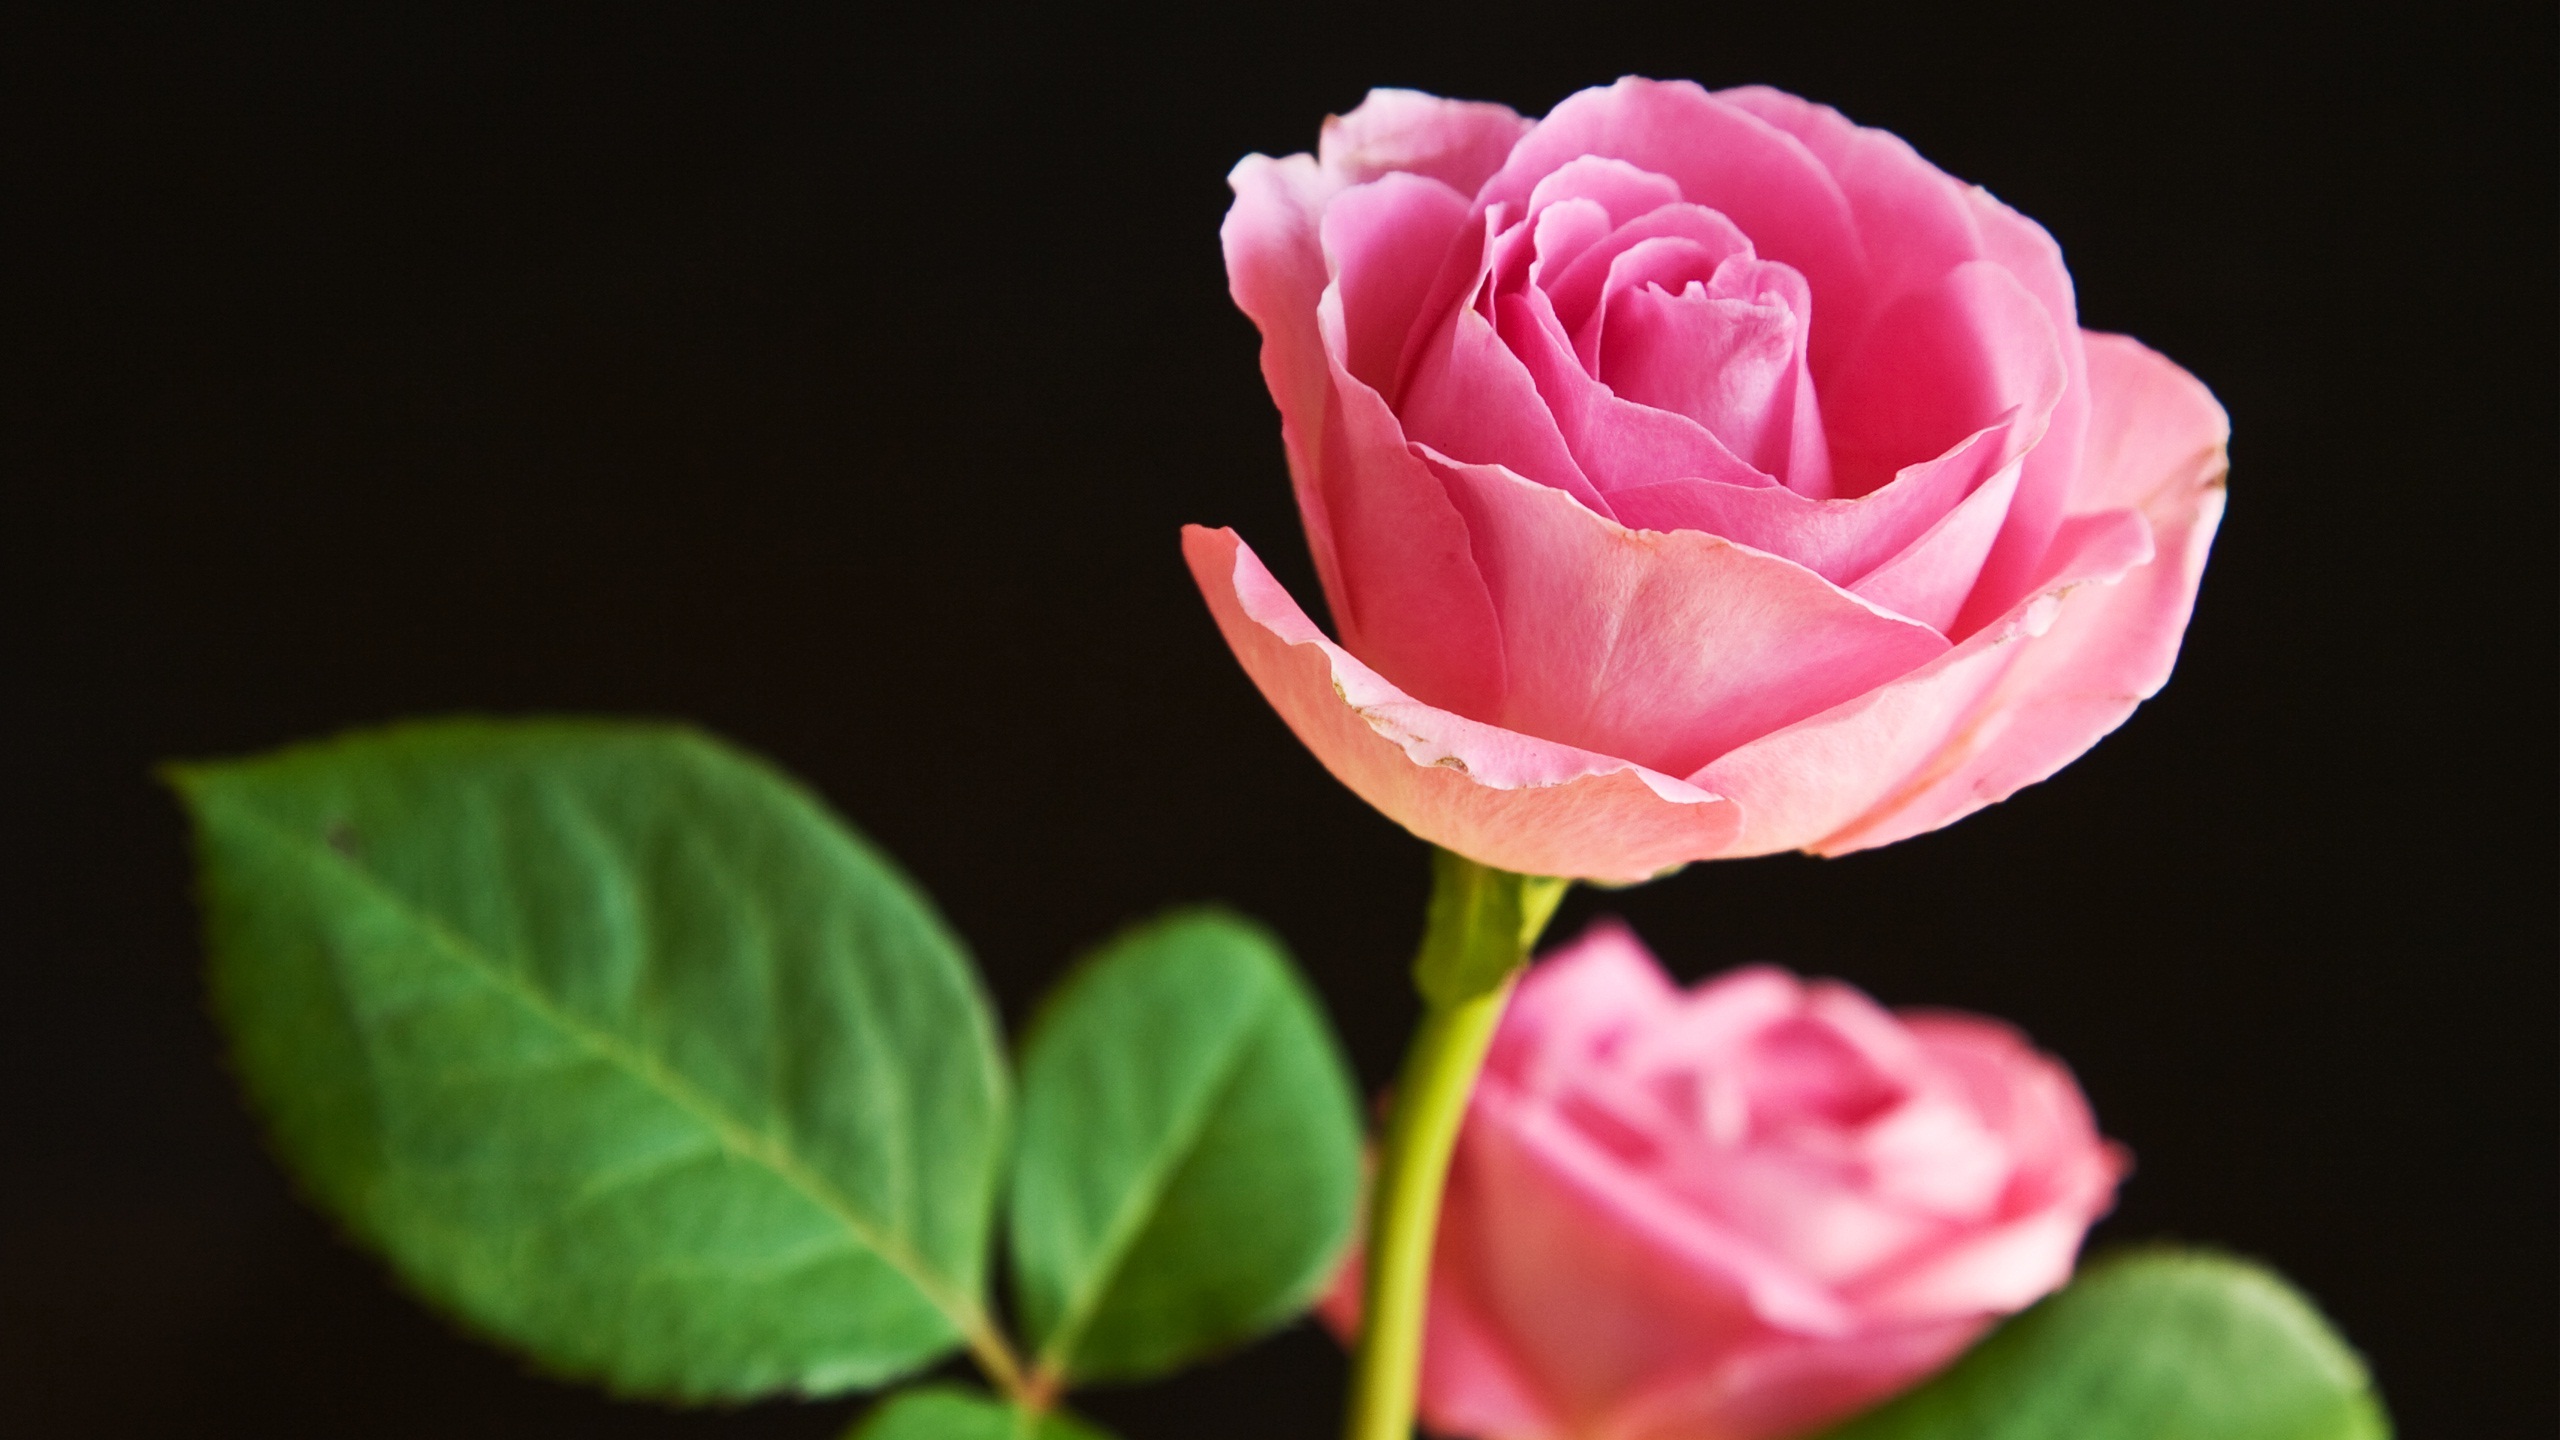 Pink Rose Pictures download free